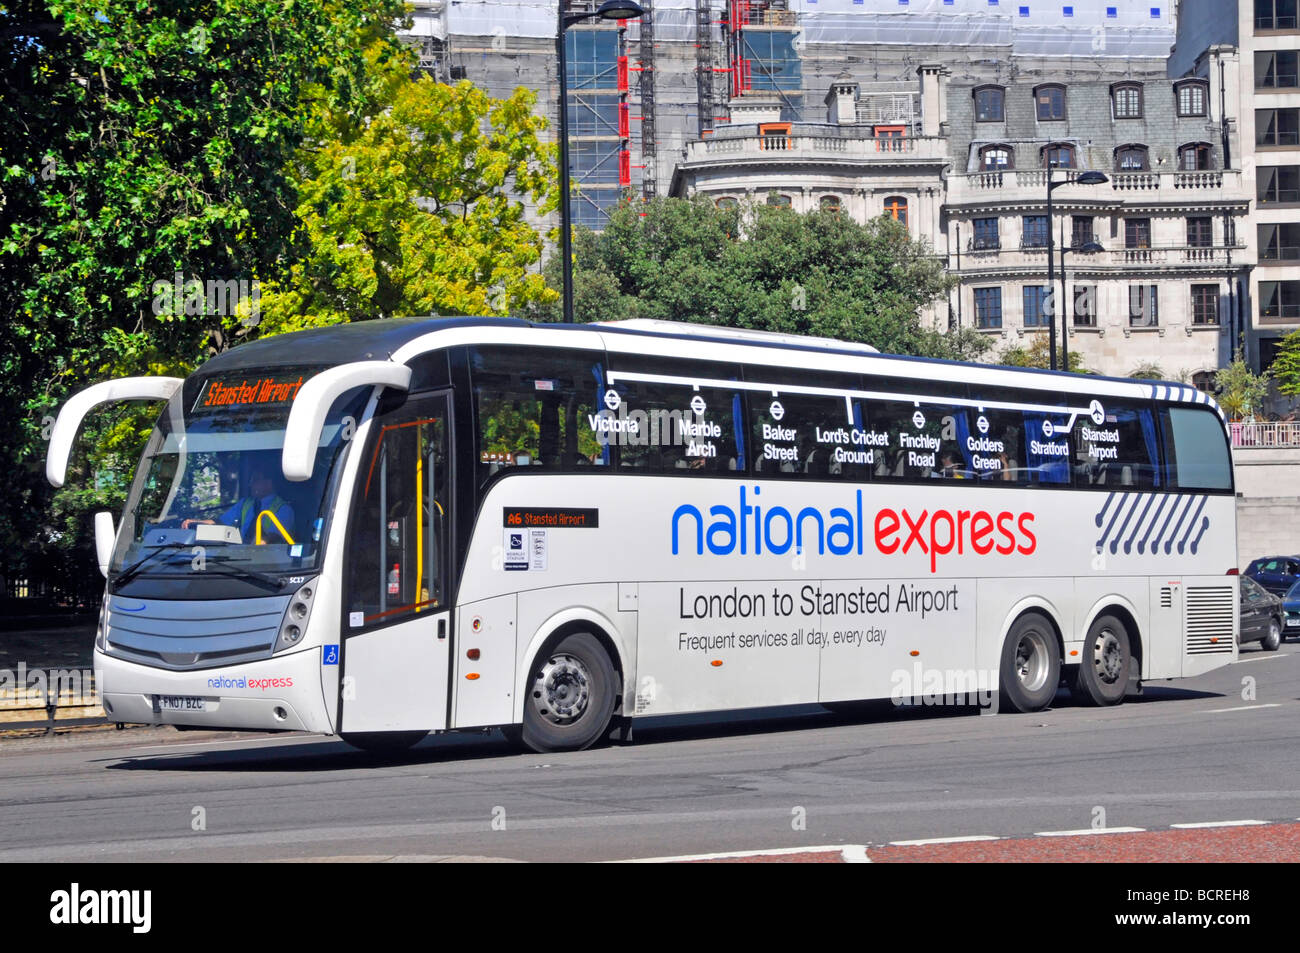 Driver at work in National Express passenger coach service on Central London to Stansted Airport route seen in Park Lane London England UK Stock Photo